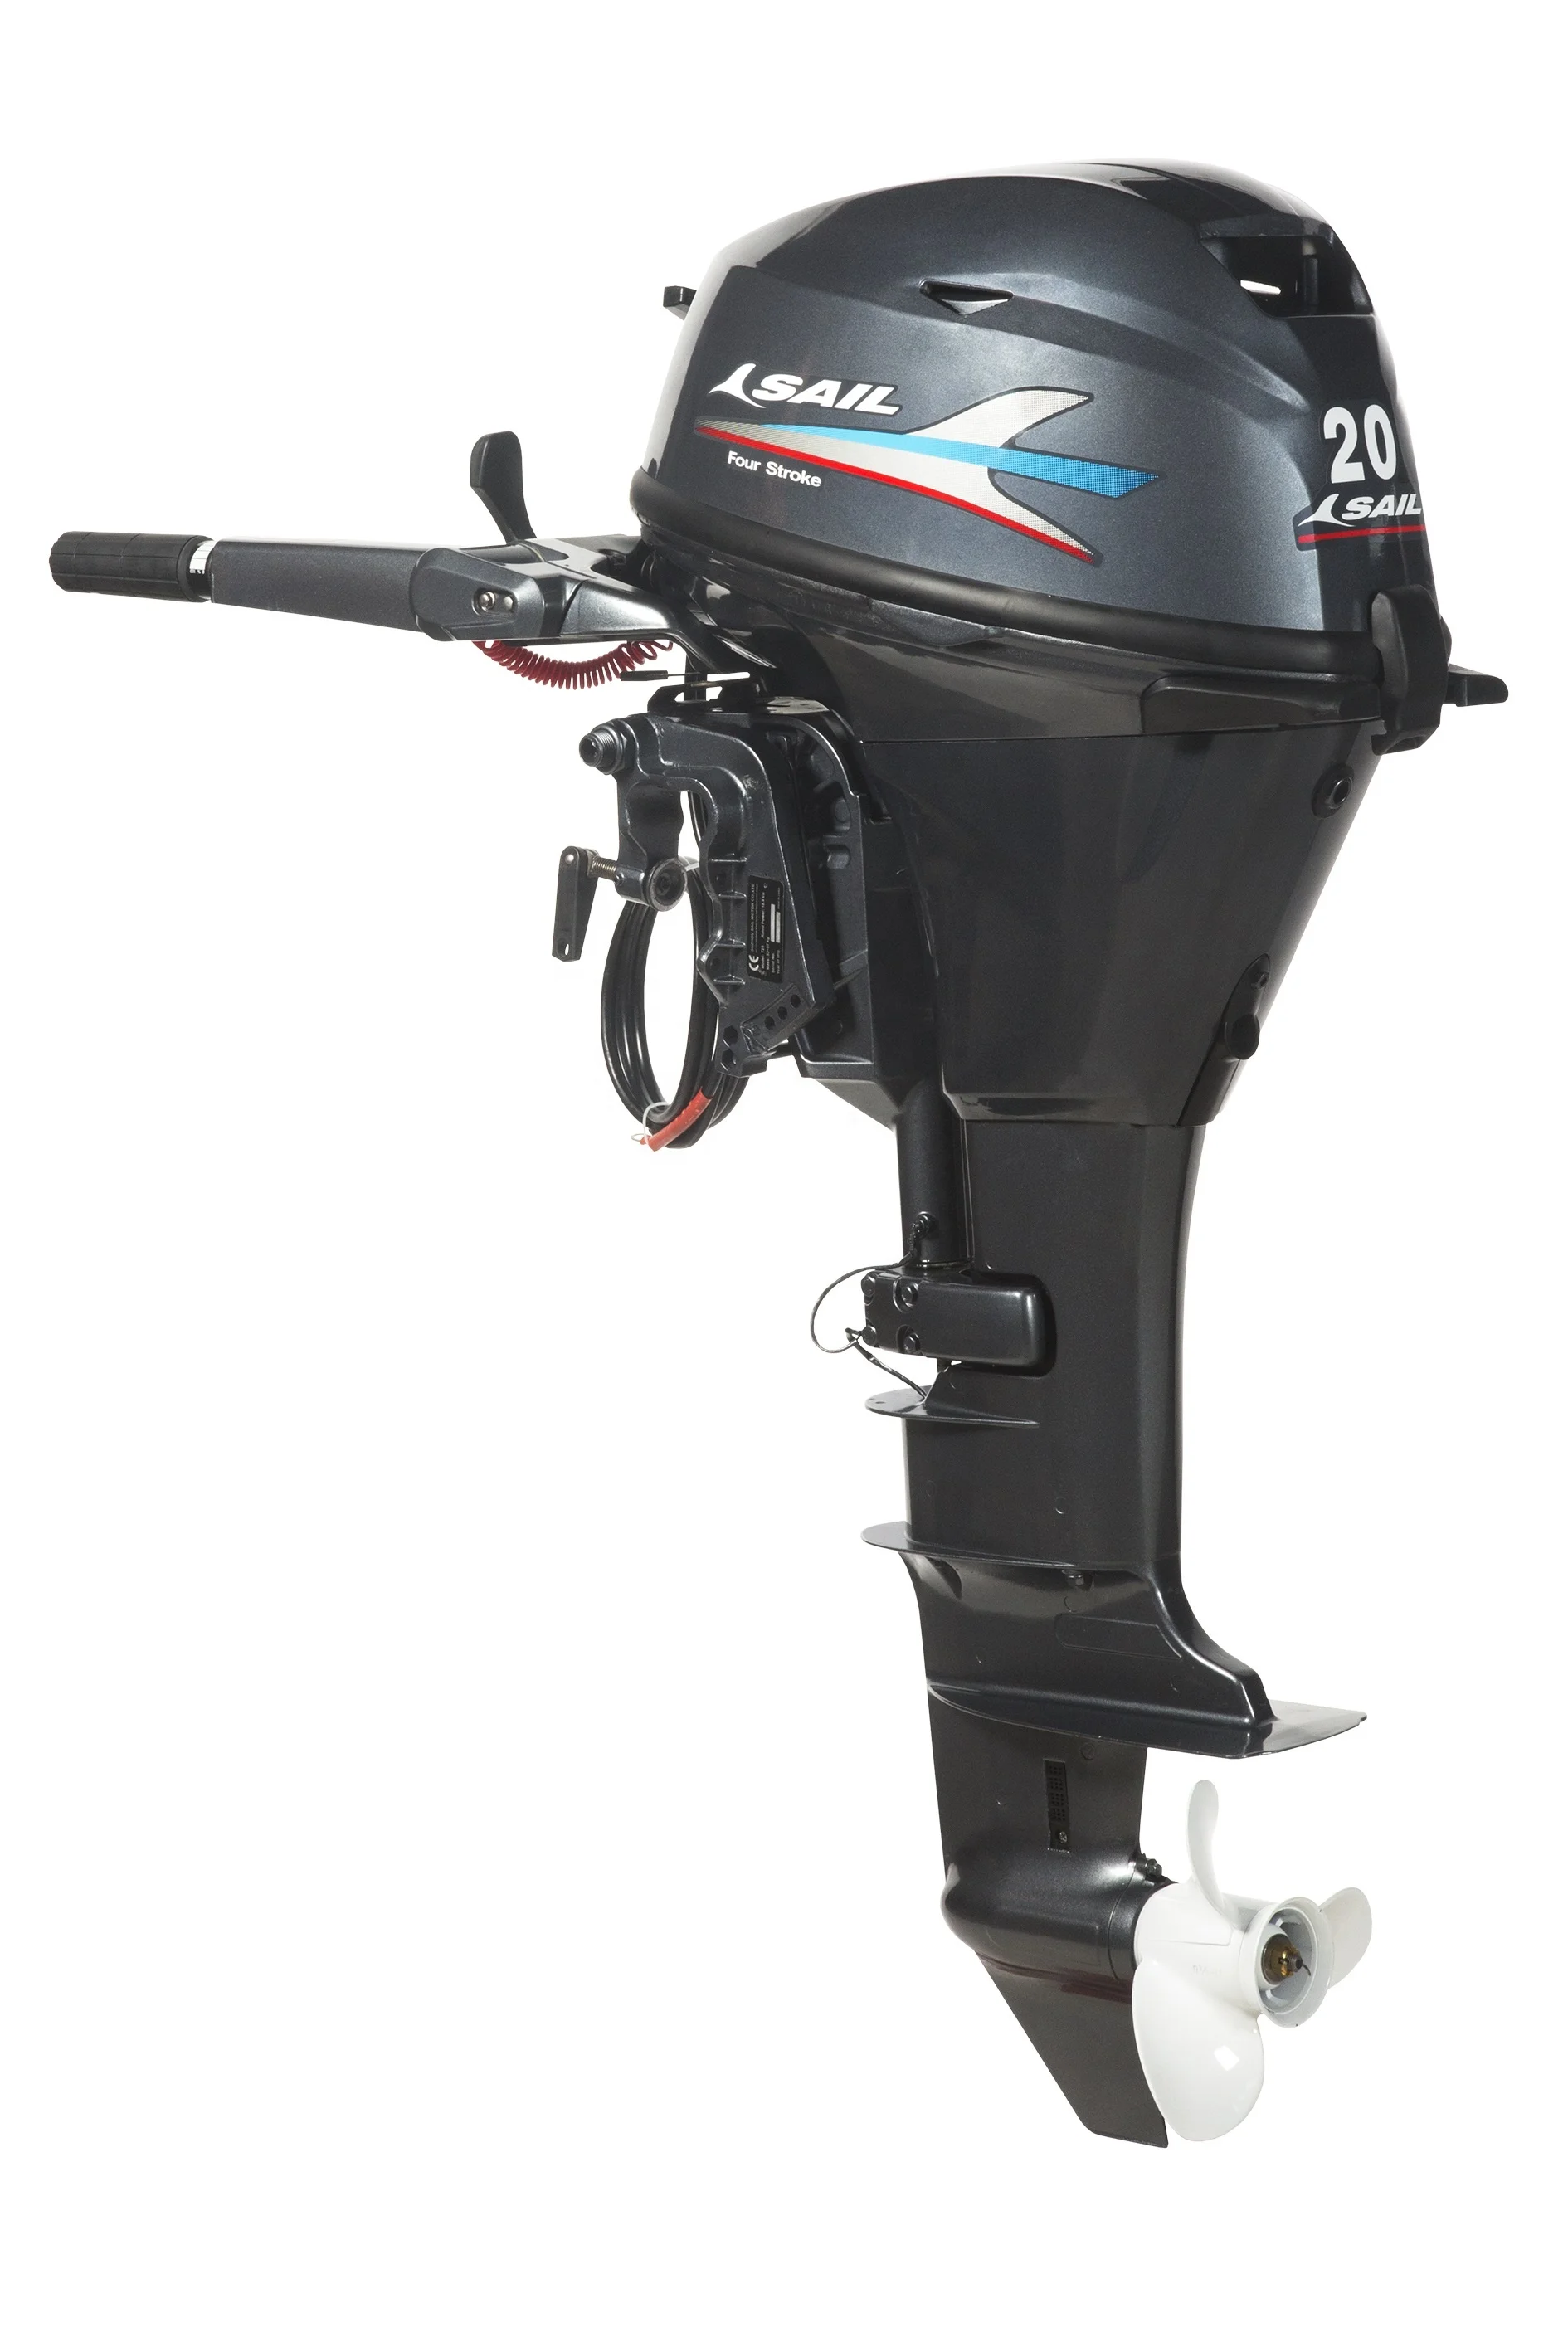 Sail 4 Stroke 20hp Outboard Engine - Buy Outboard Motor,Outboard  Engine,20hp Outboard Motor Product on Alibaba.com